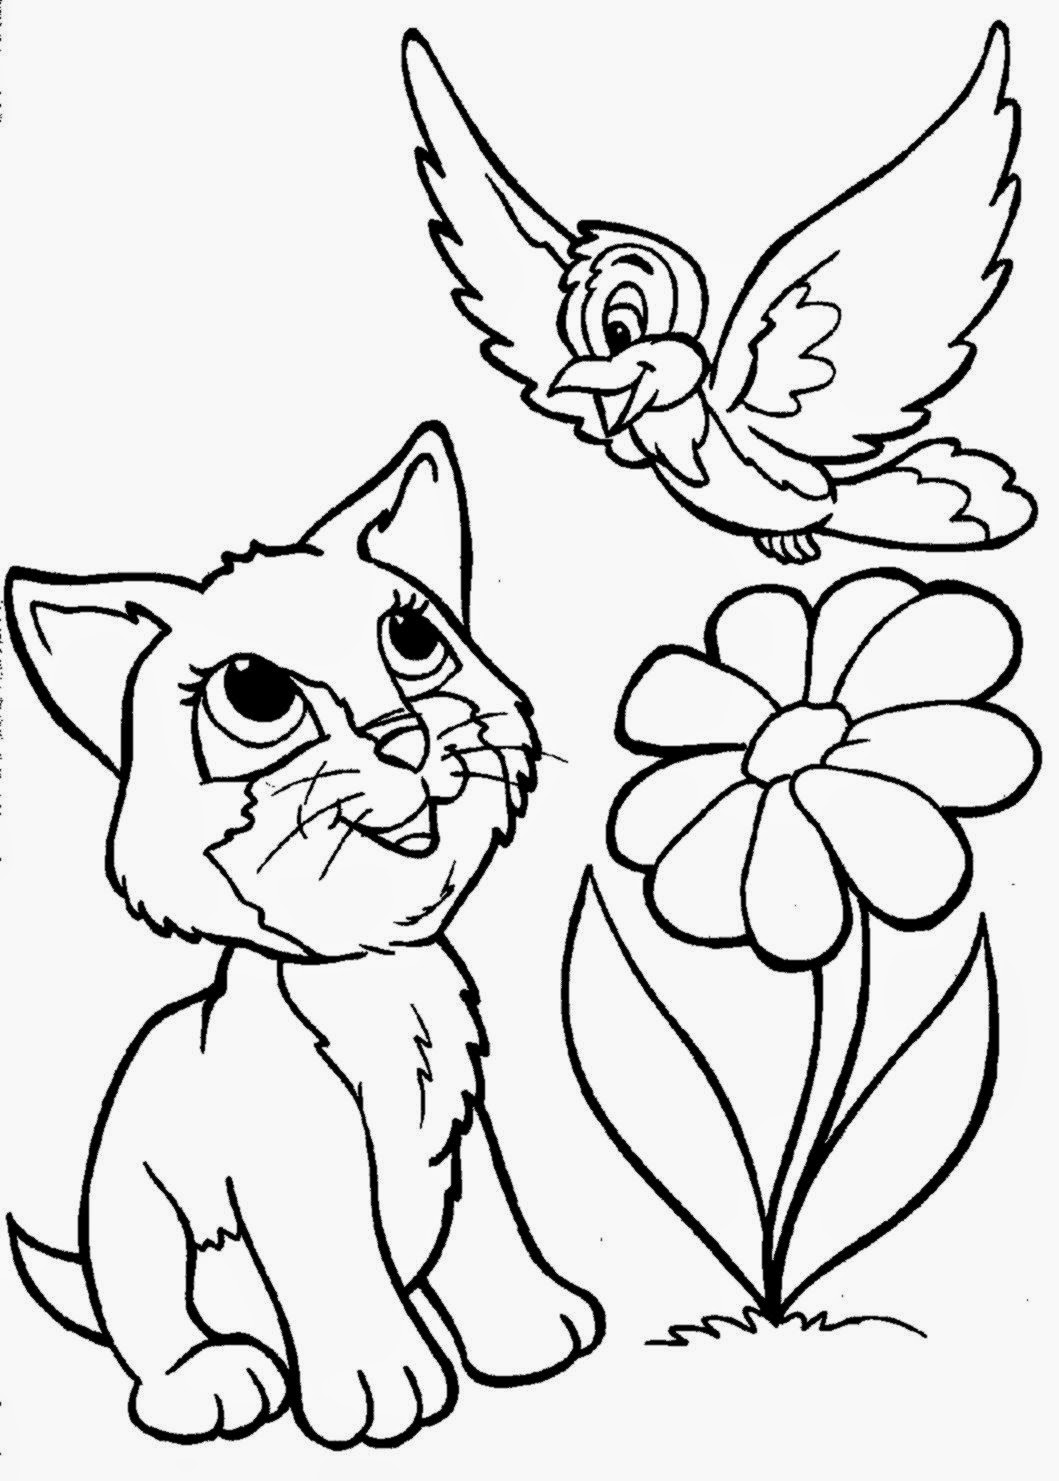 February 2015 | Free Coloring Sheet